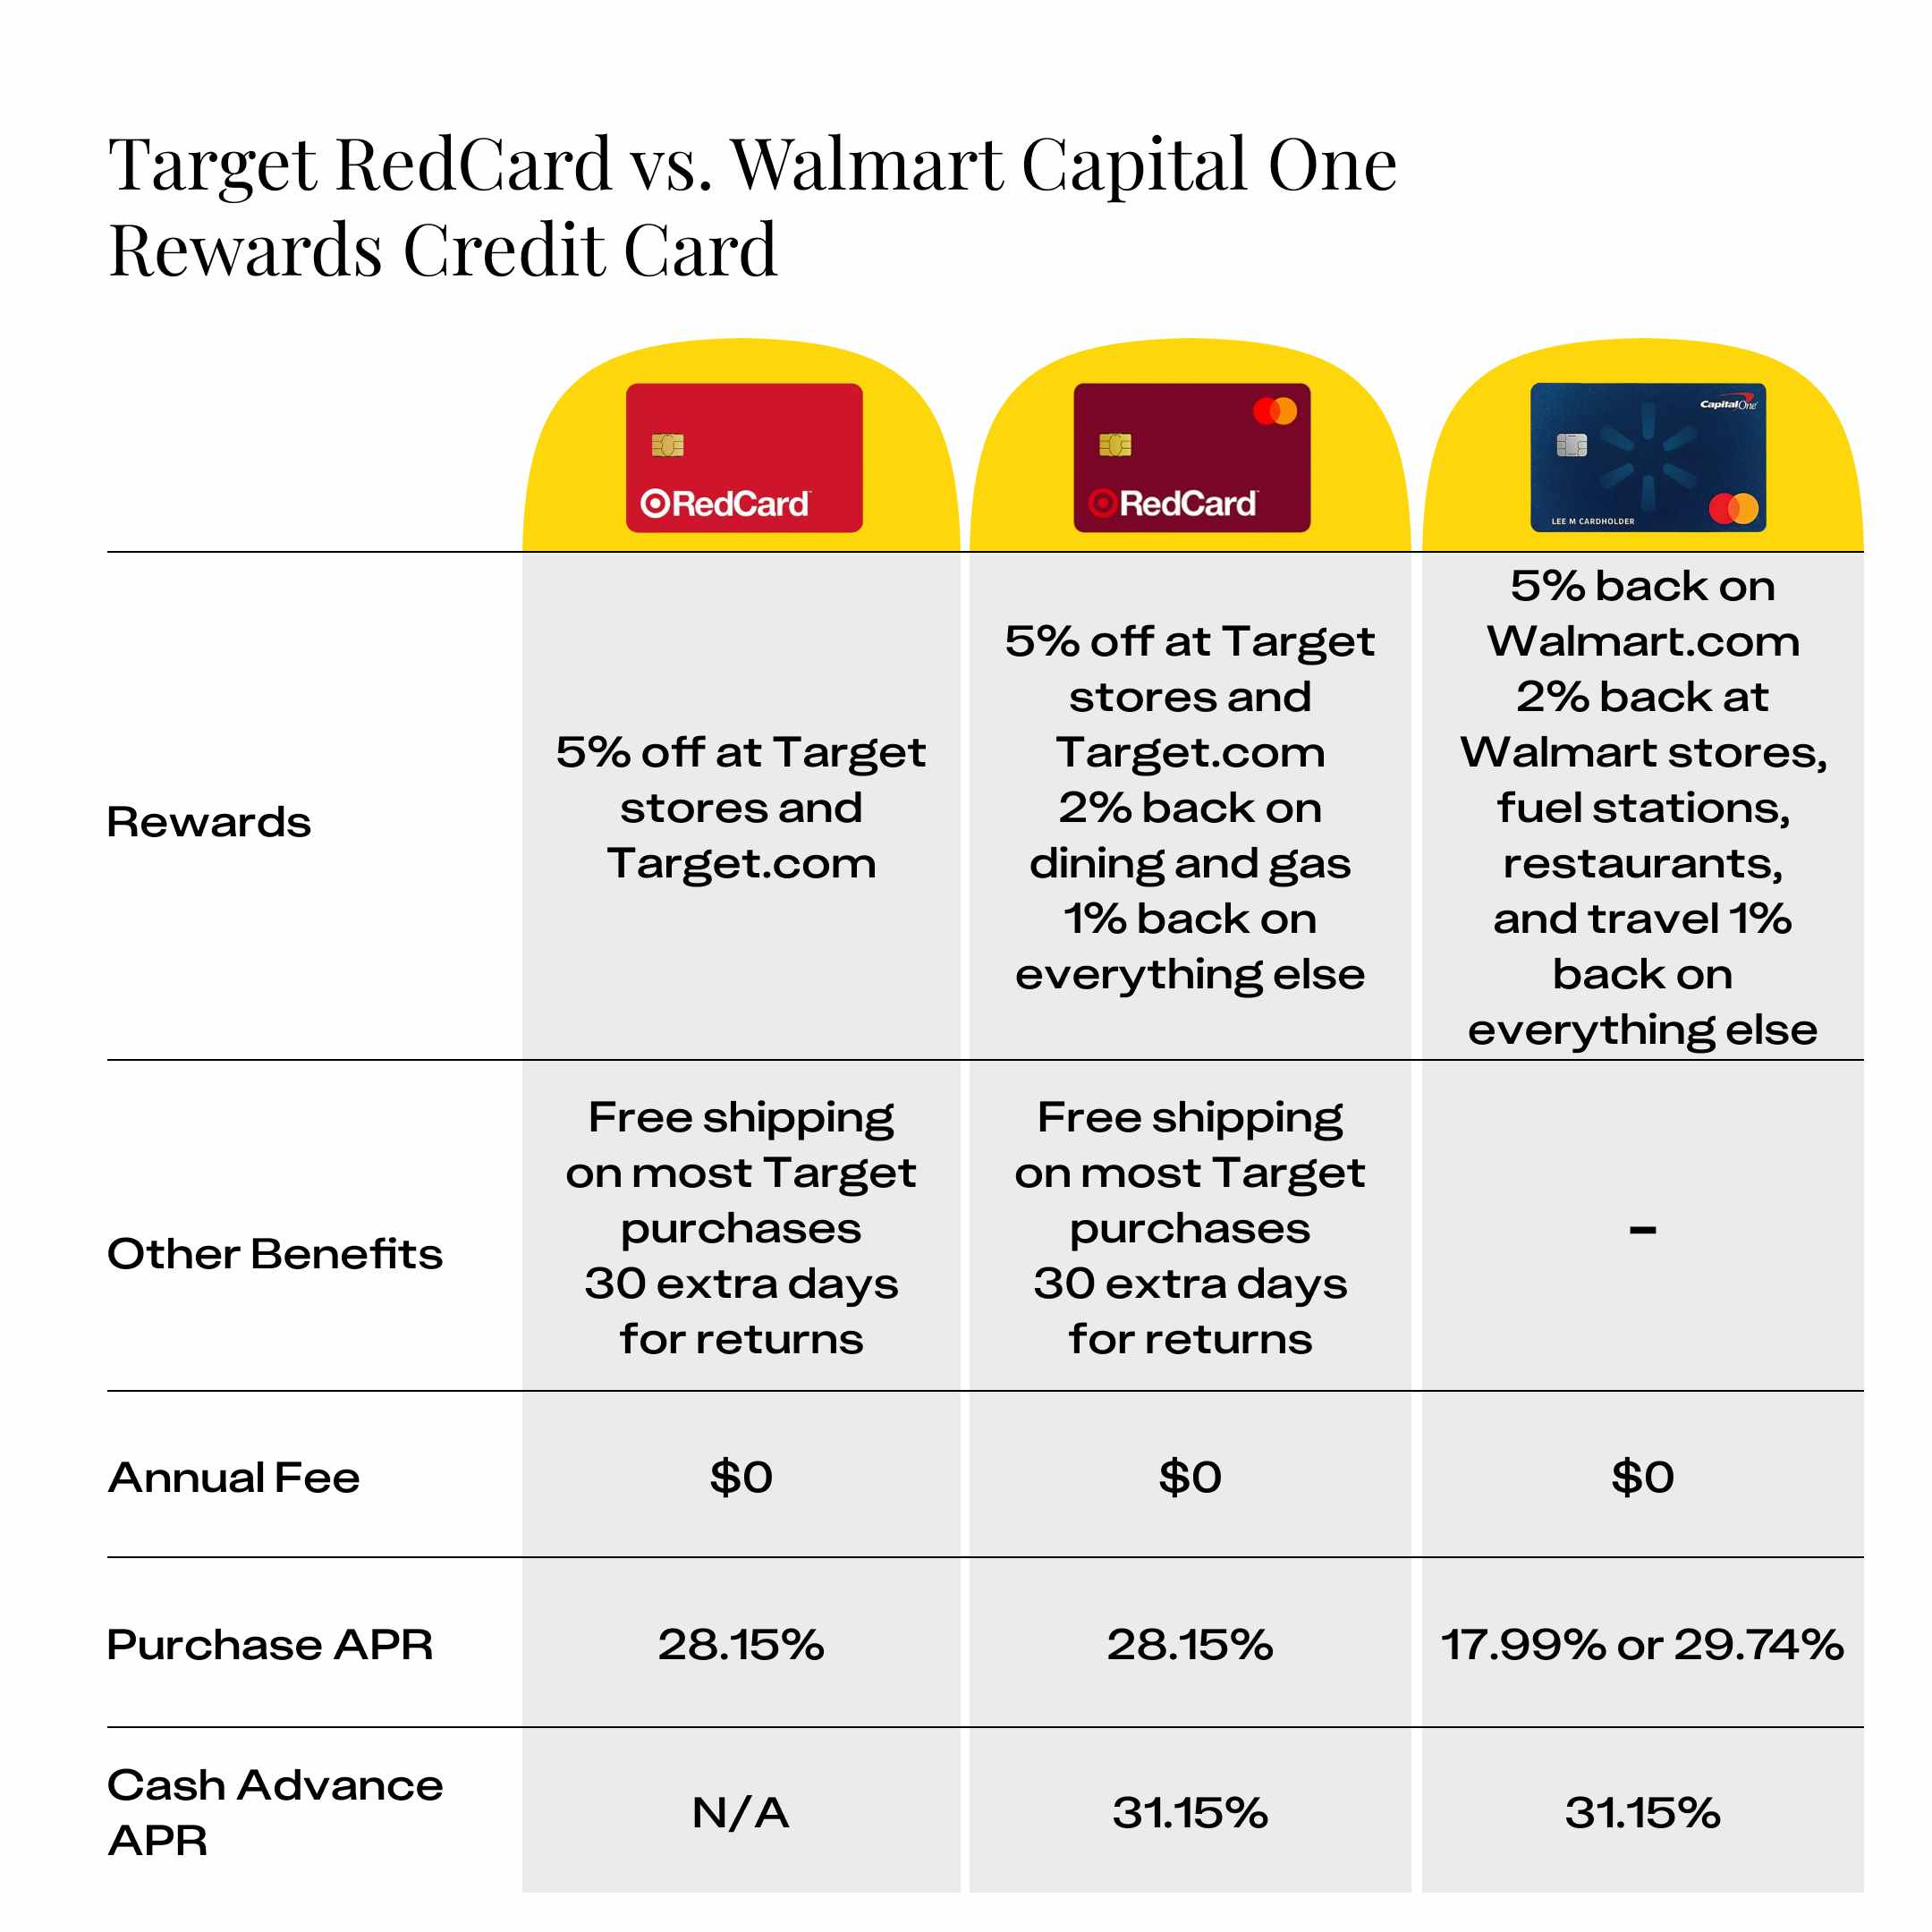 a comparison for the Target RedCard and Walmart Capital One Credit Card